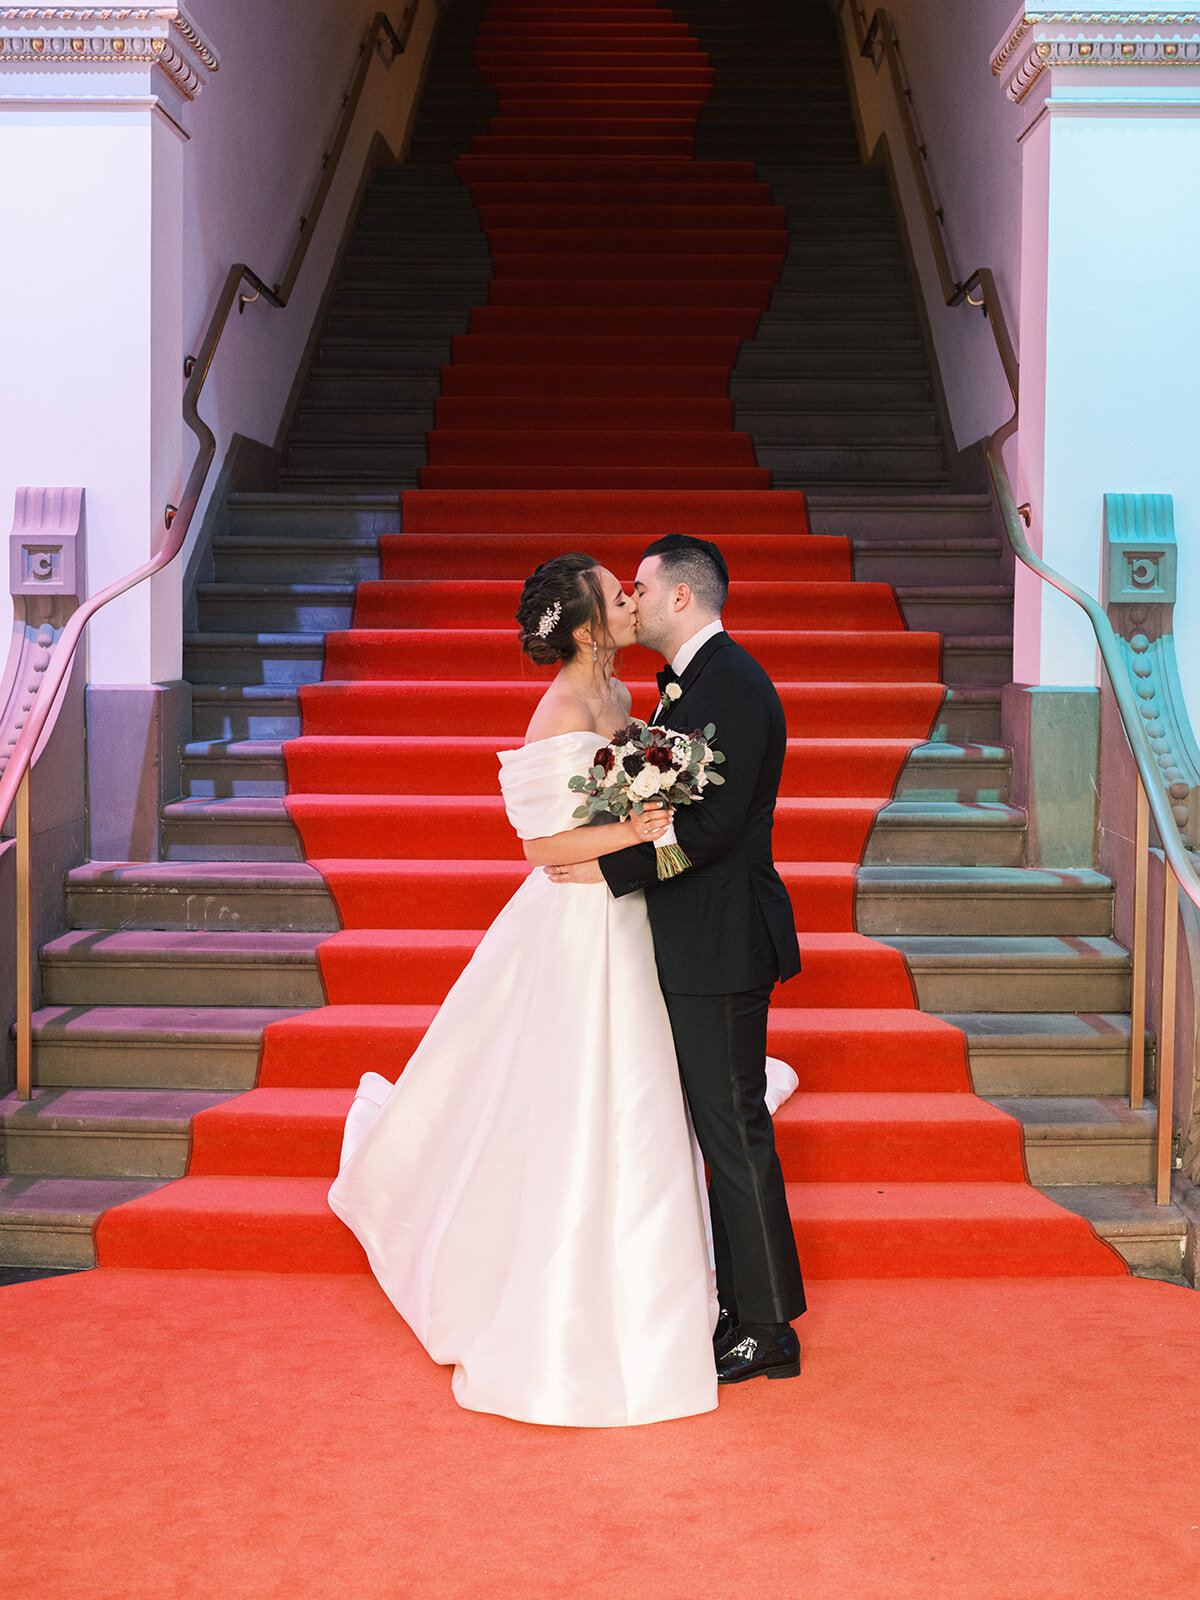 agriffin-events-renwick-gallery-smithsonian-dc-wedding-planner-84